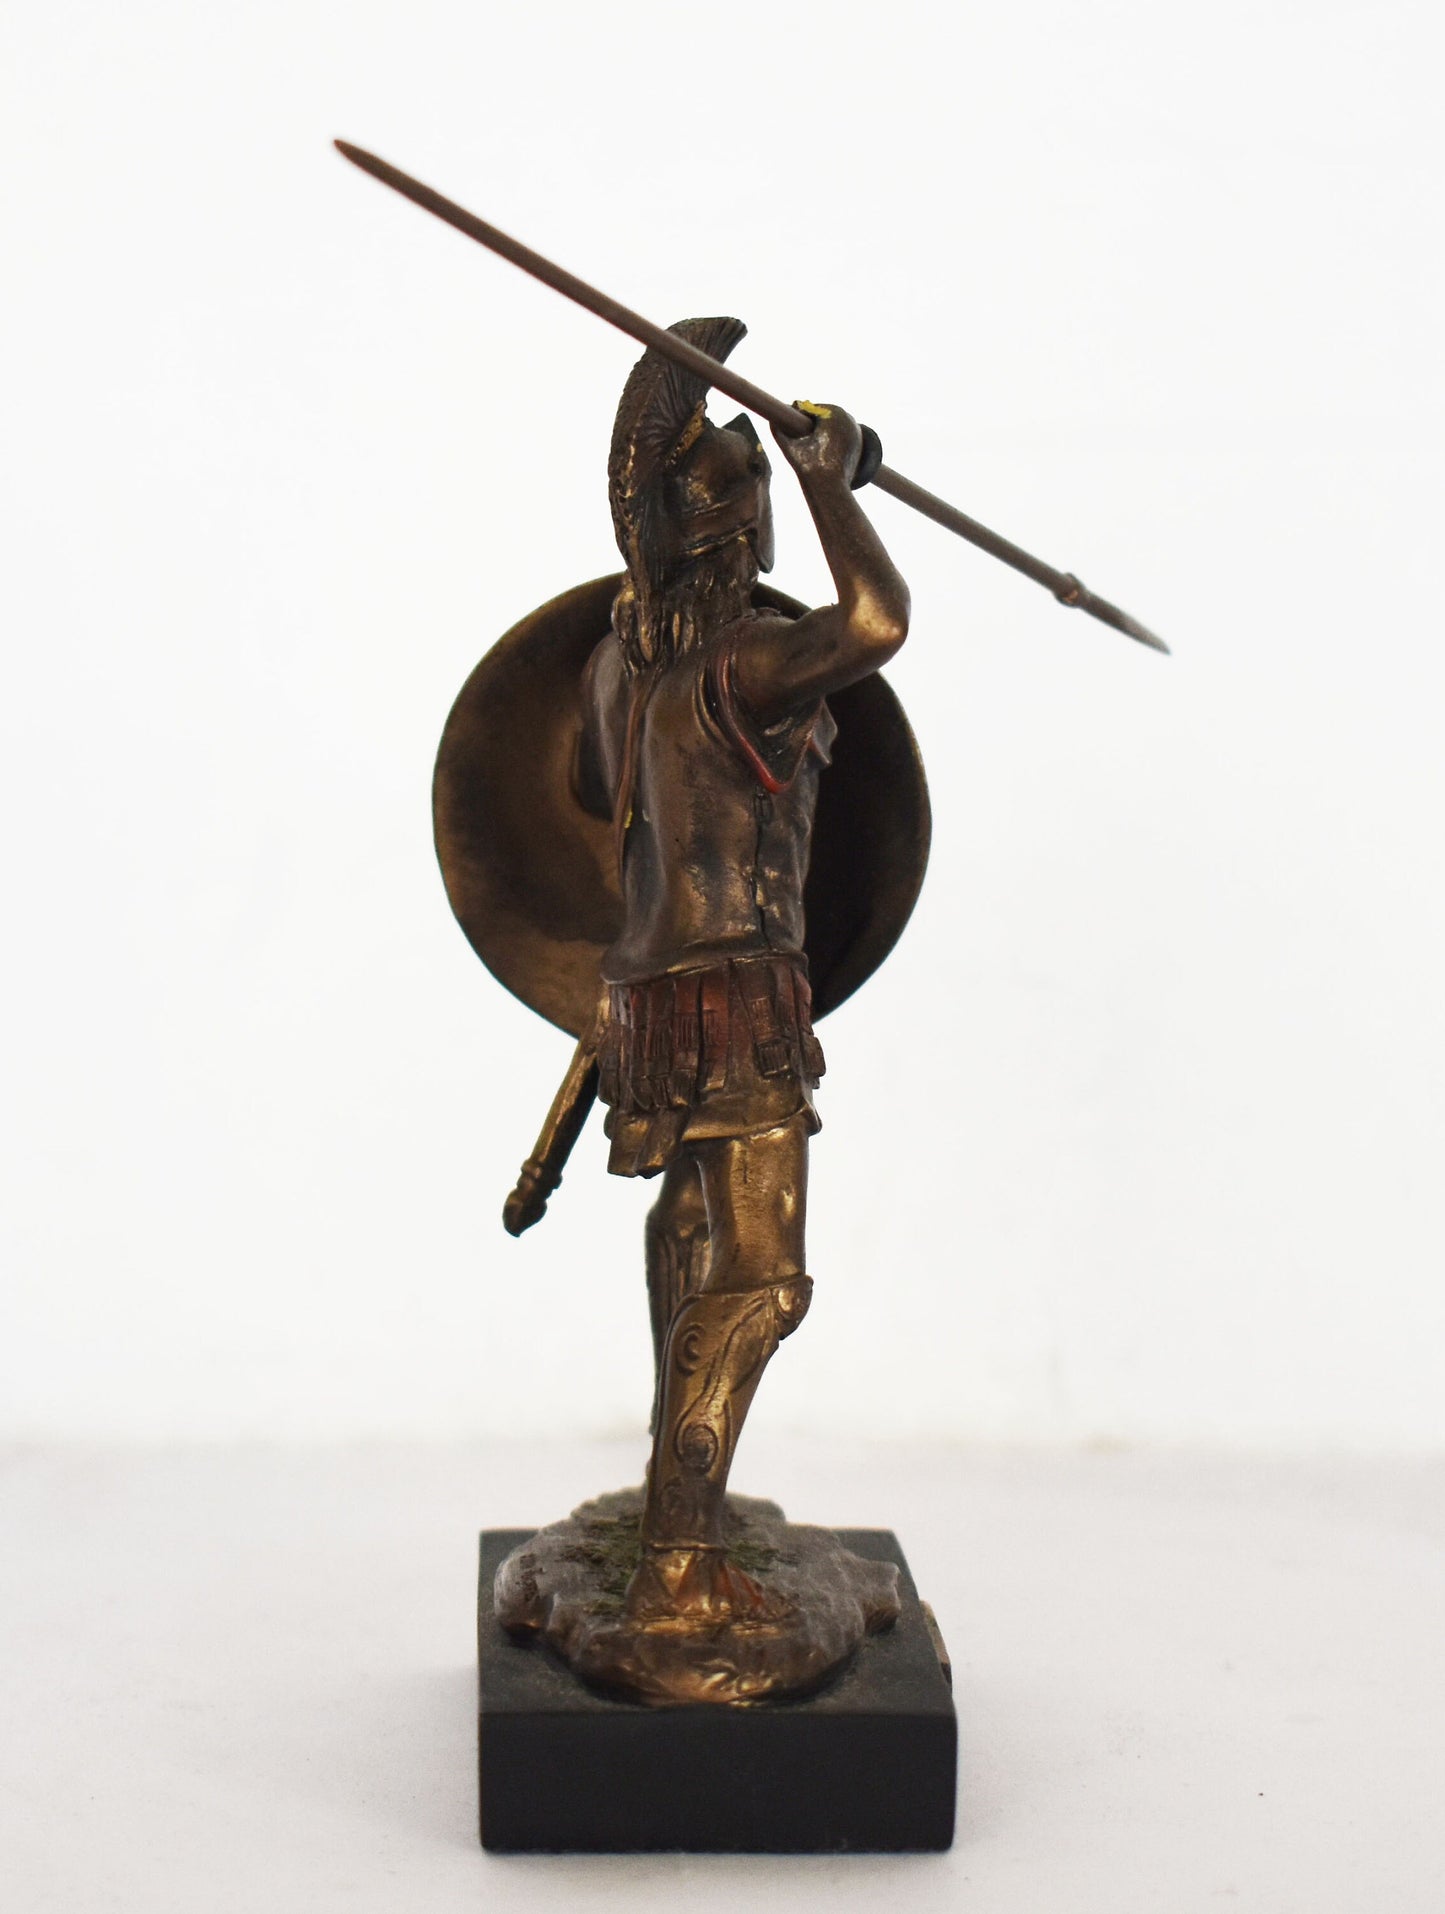 Spartan Hoplite Mini - King Leonidas and 300 - Battle of Thermopylae - 480 BC - Cold Cast Bronze Resin